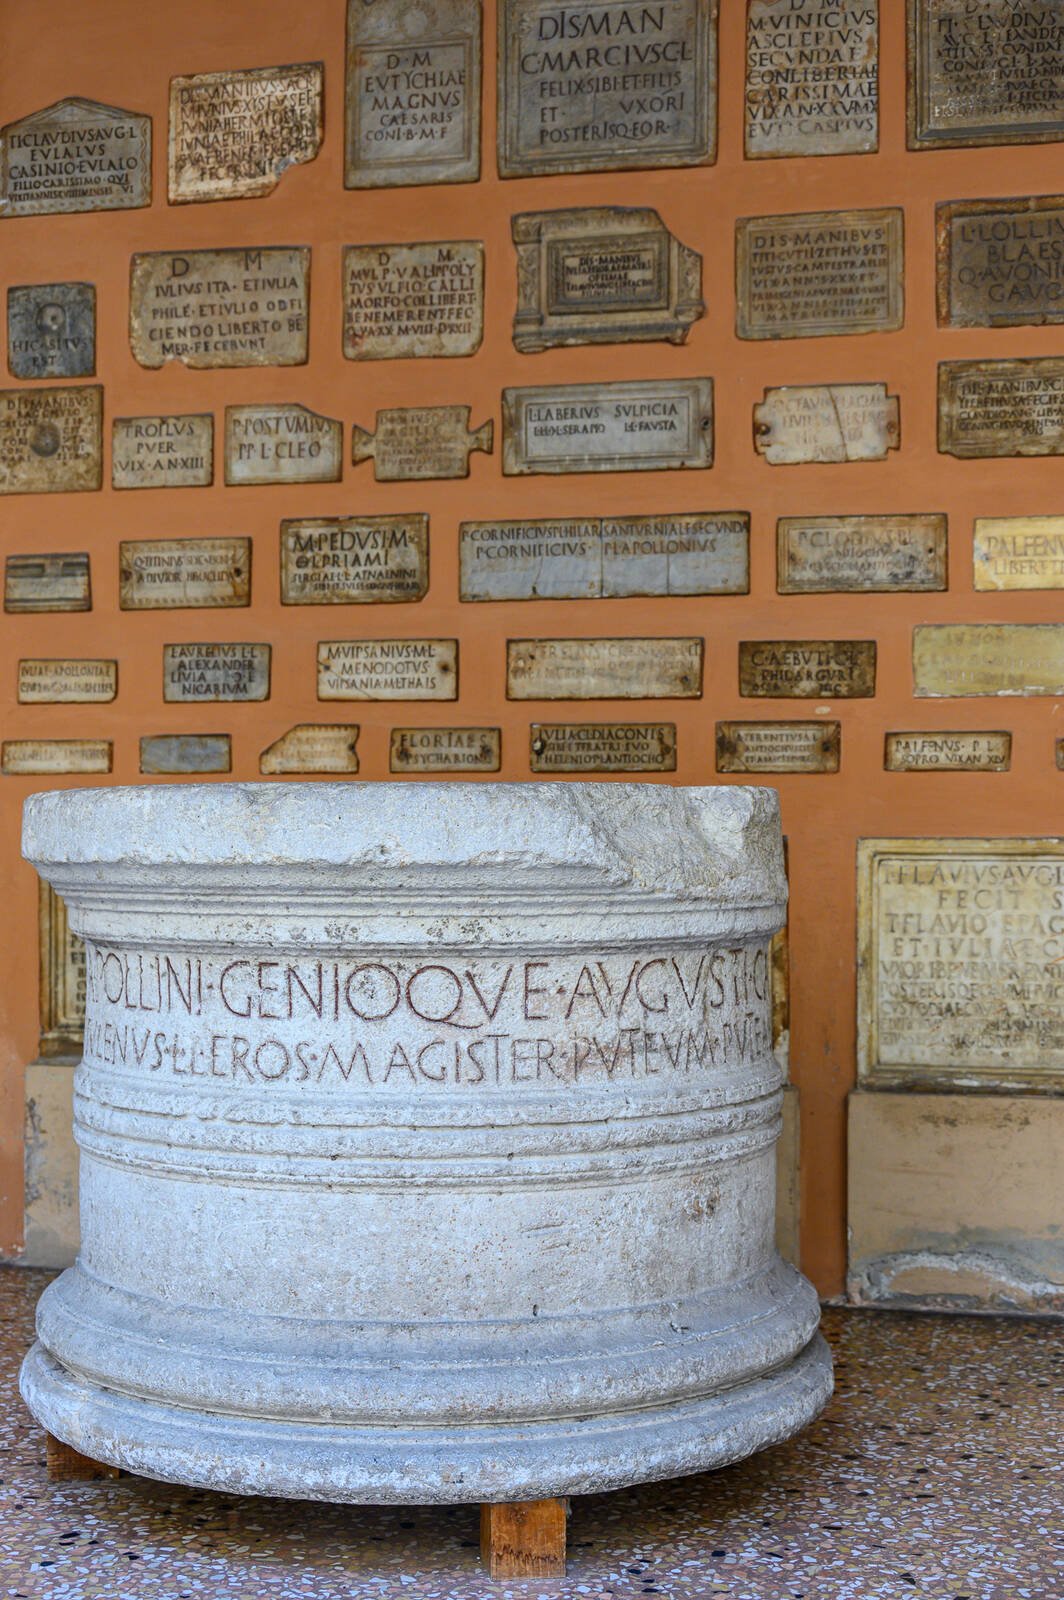 Image of Museo Civico Archeologico by Sue Wolfe